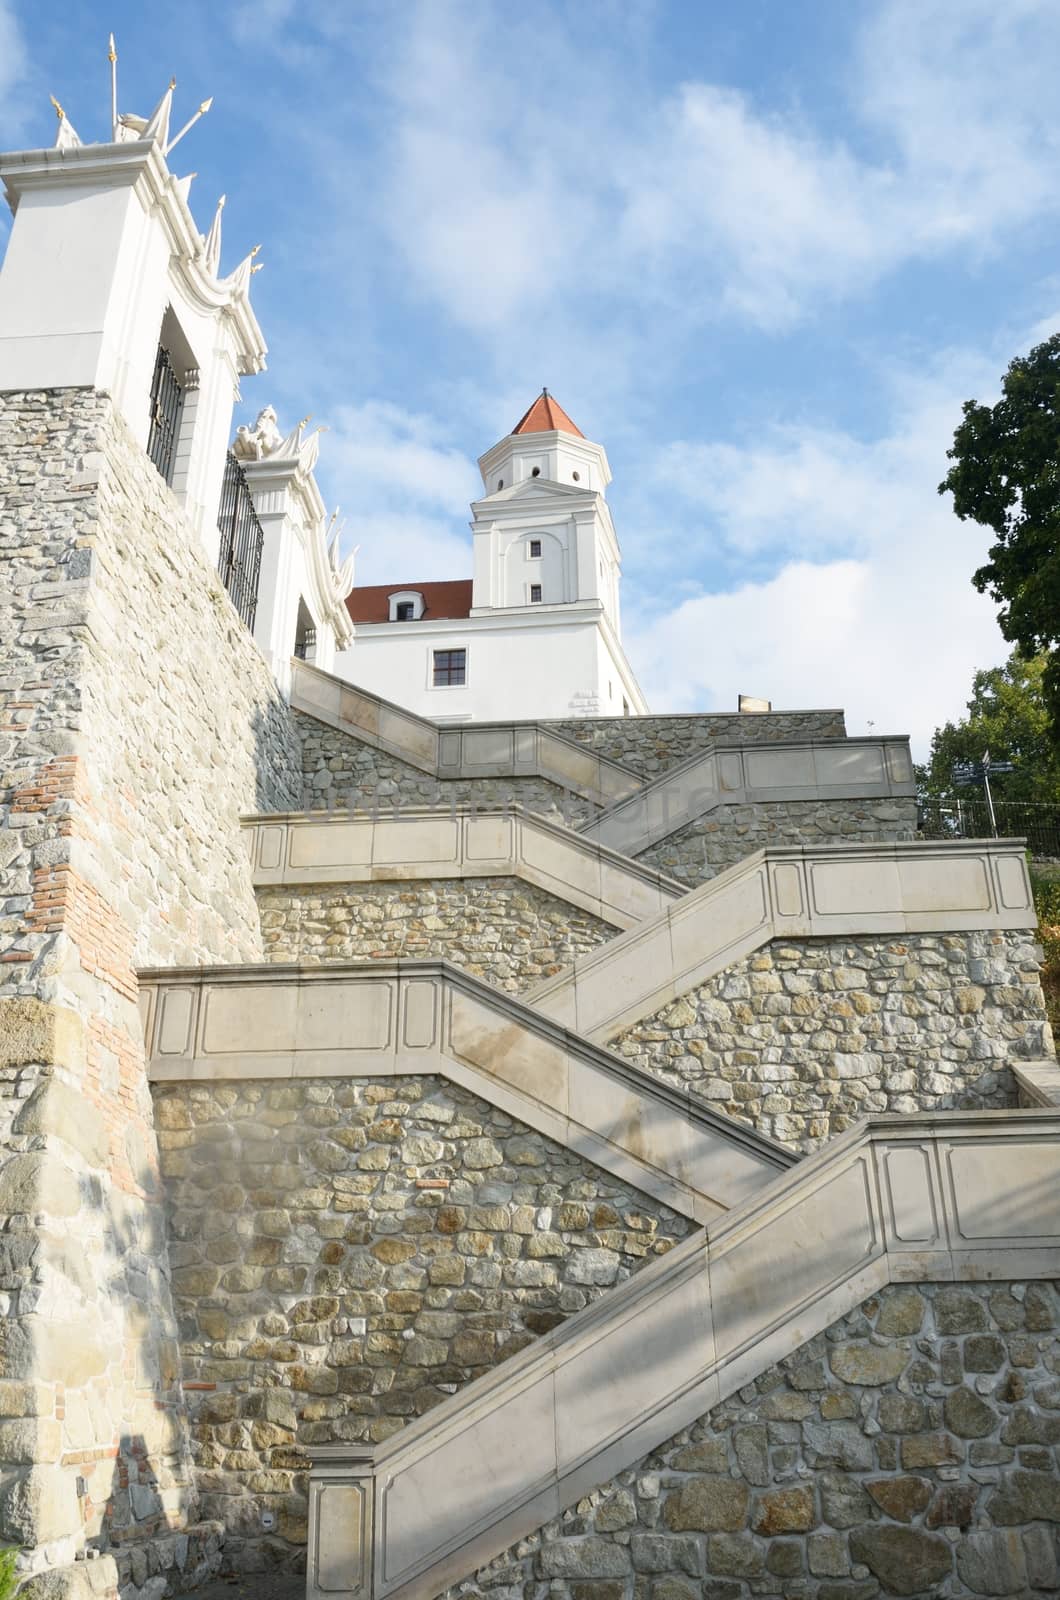 Looking up at Bratislava Castle by pauws99